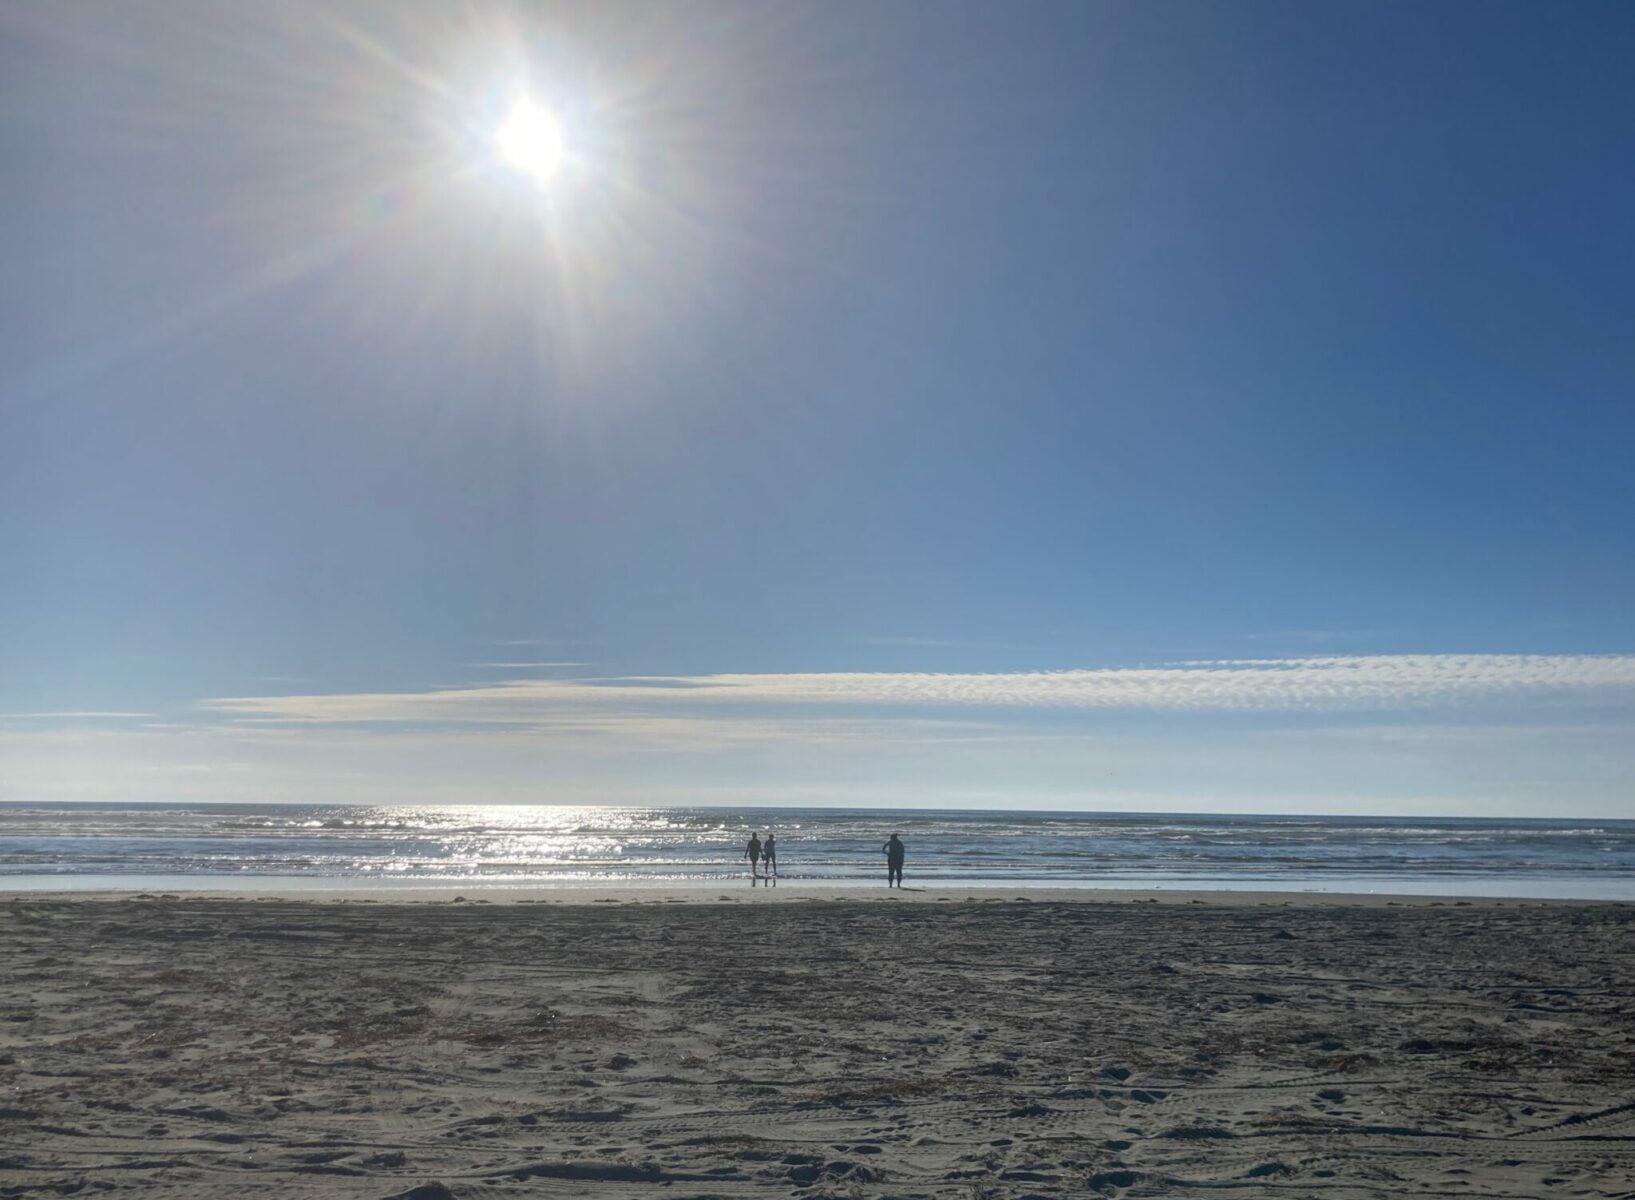 The sun getting low in the sky but still bright over the Pacific Ocean at a sandy beach. Three people are silouetted in the distance at the edge of the water